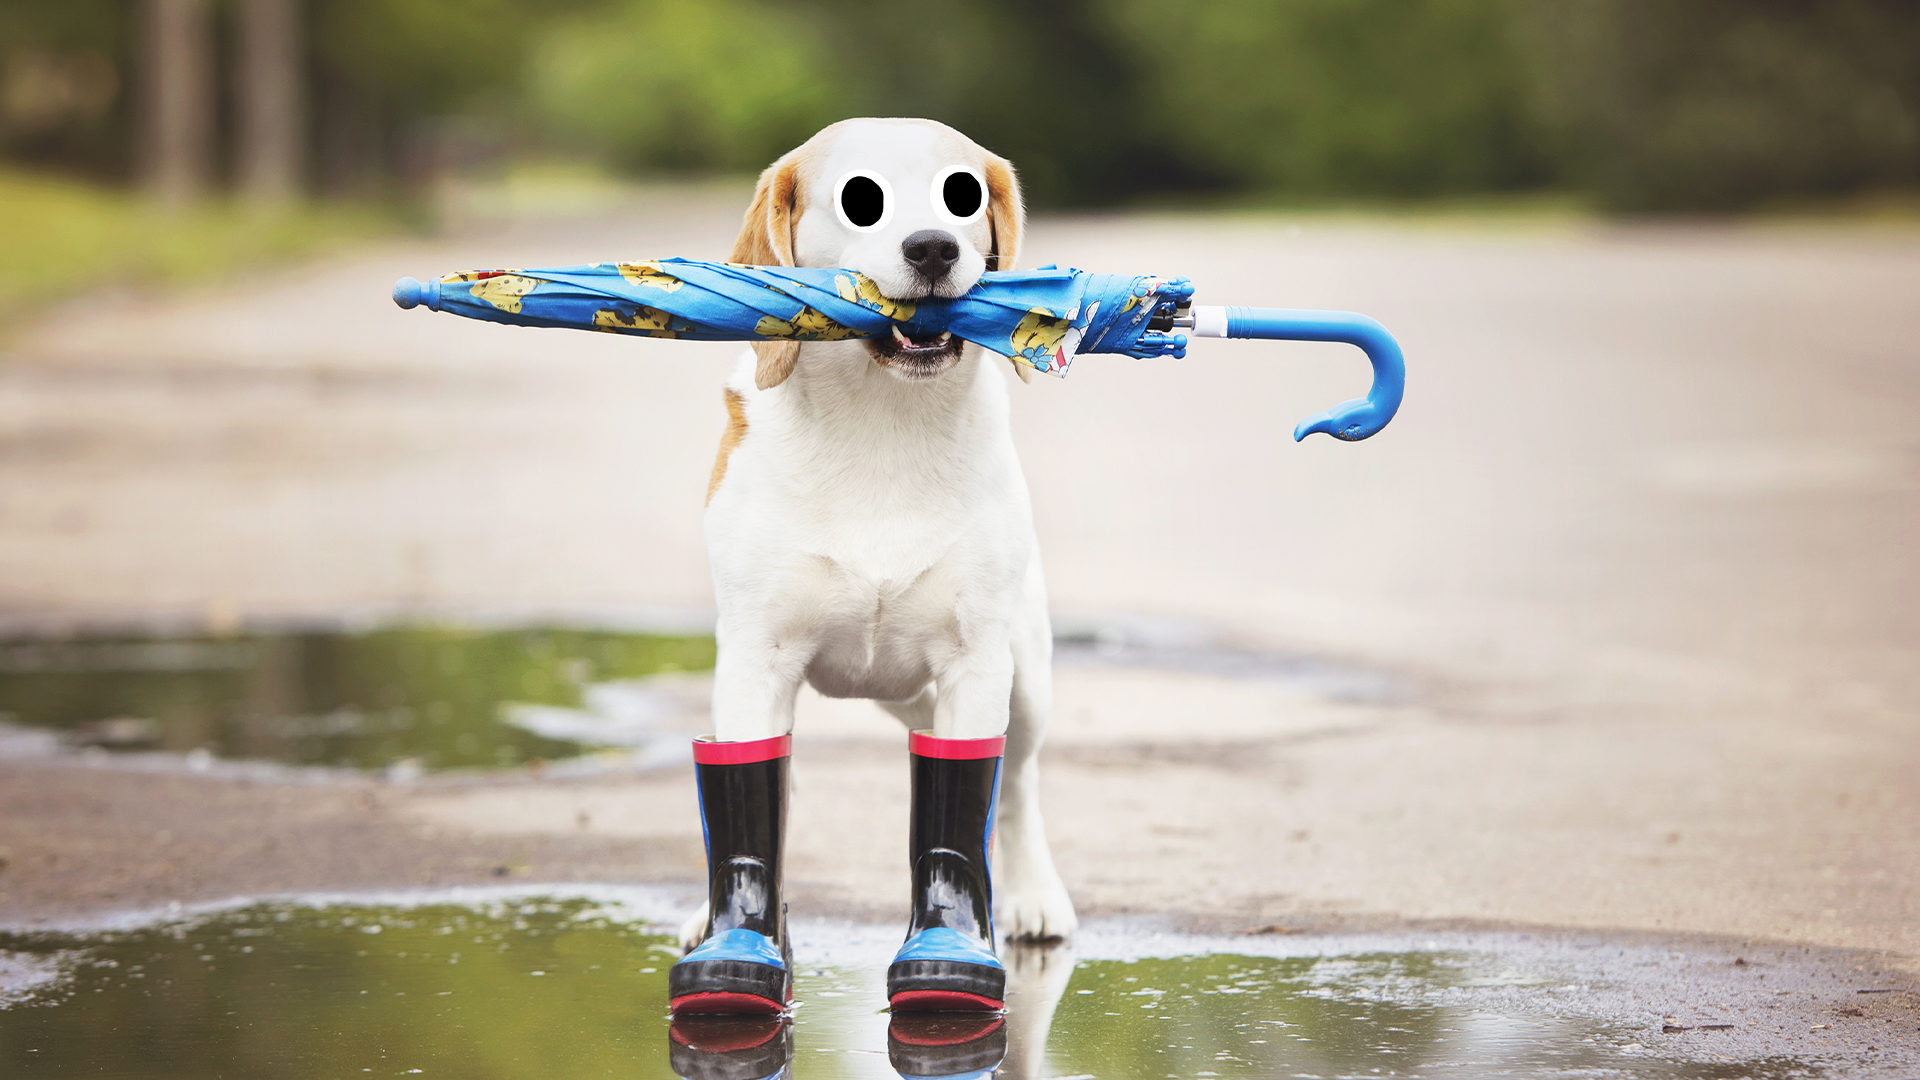 A dog in a puddle, wearing wellies and holding an umbrella